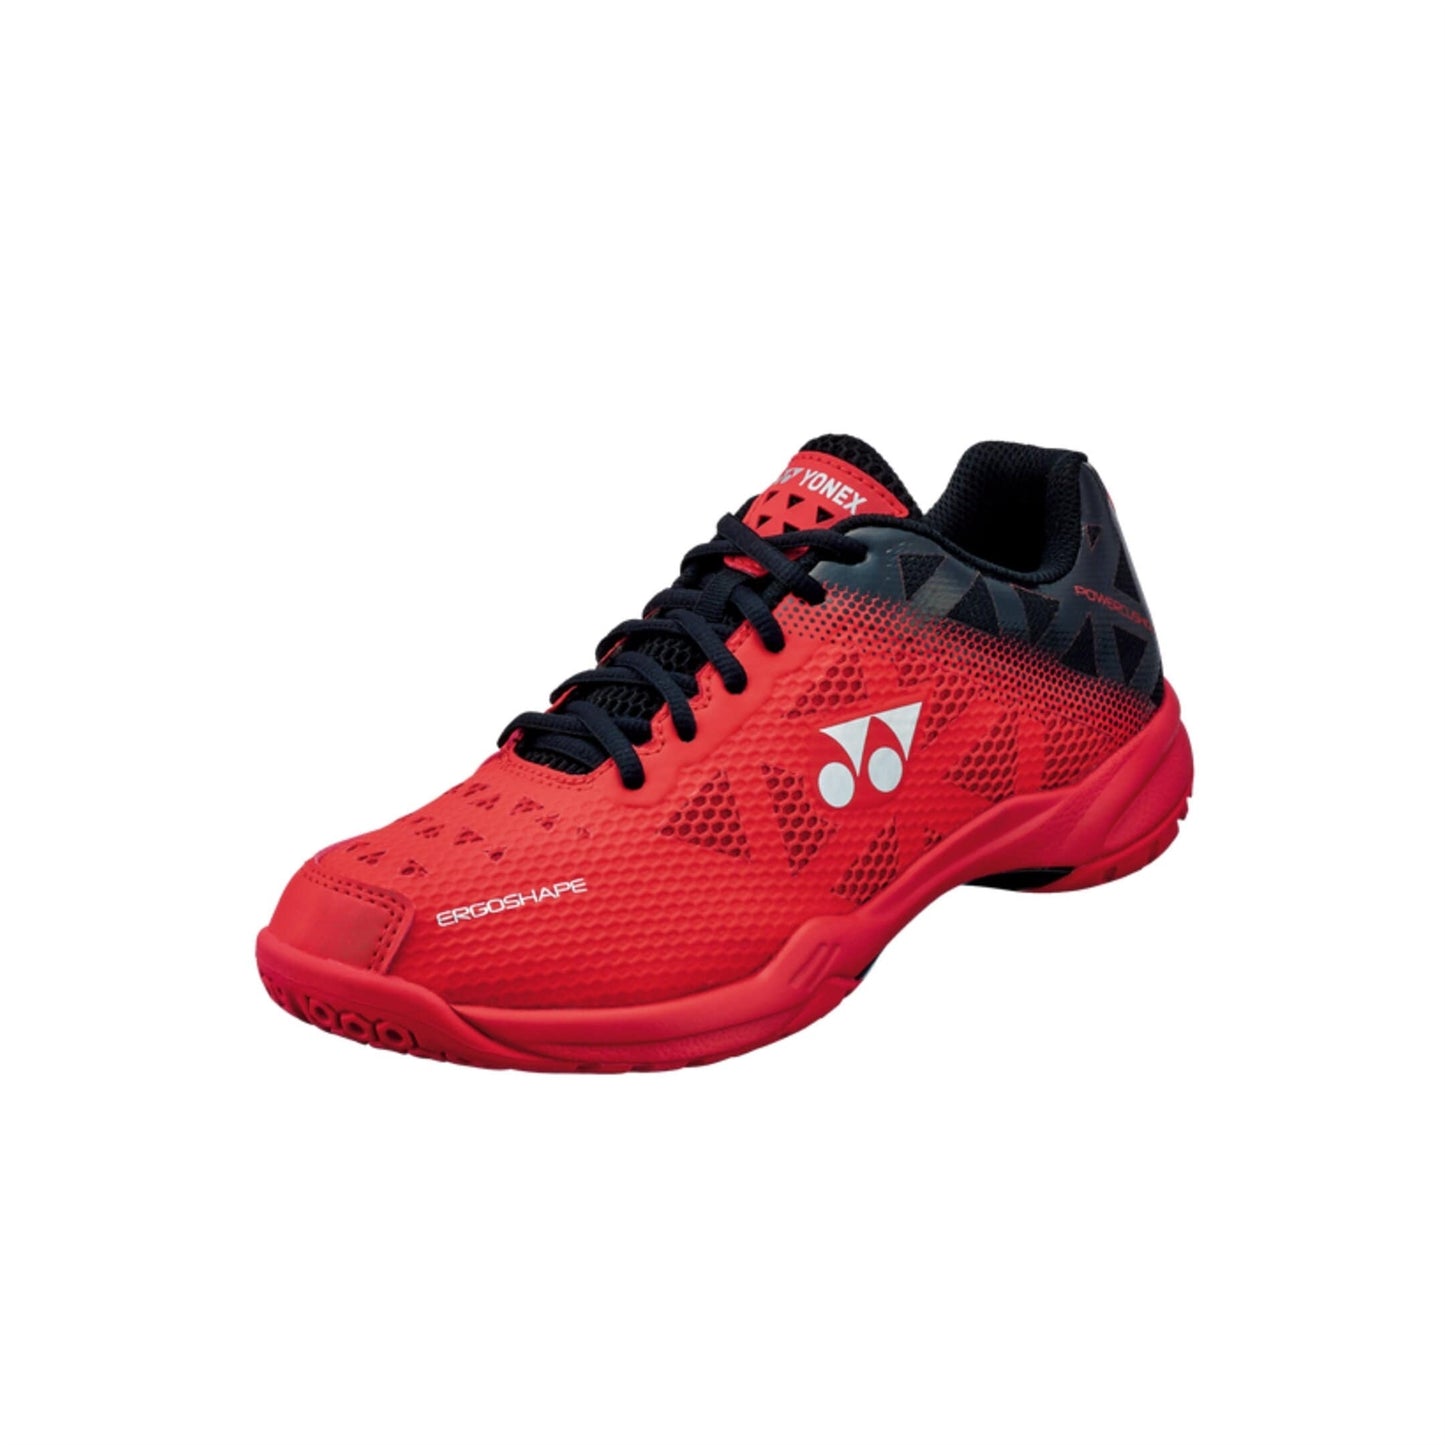 Yonex Power Cushion 50 Unisex Badminton Shoe in White Red and Black for sale at GSM Sports